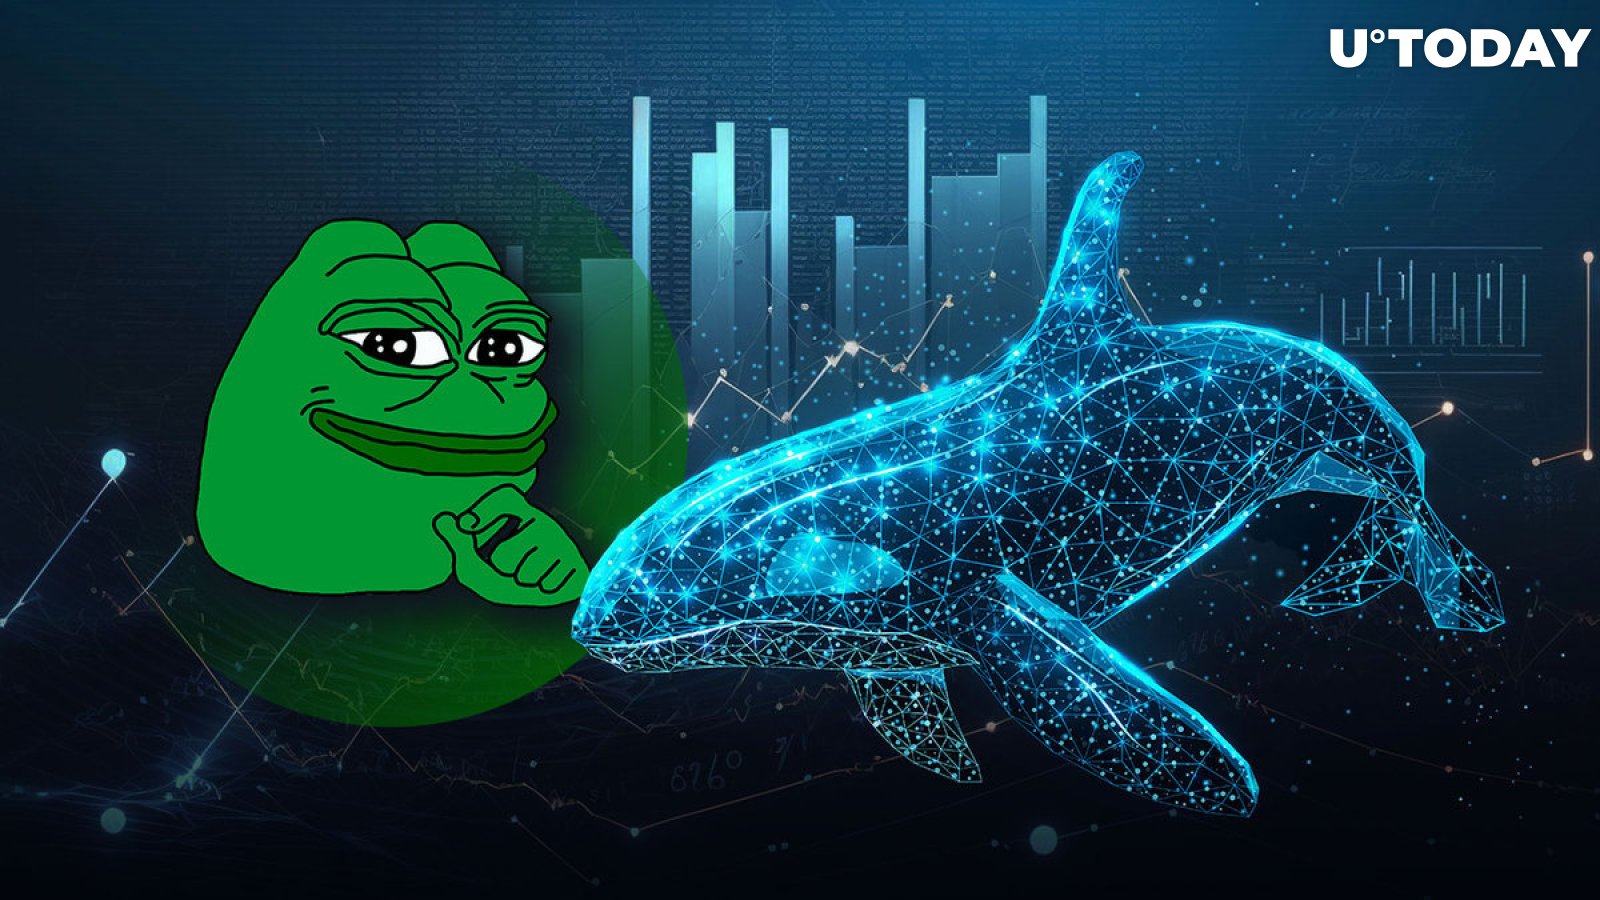 Pepe (PEPE) Whales Buy Over 560 Billion Coins - What's Happening?